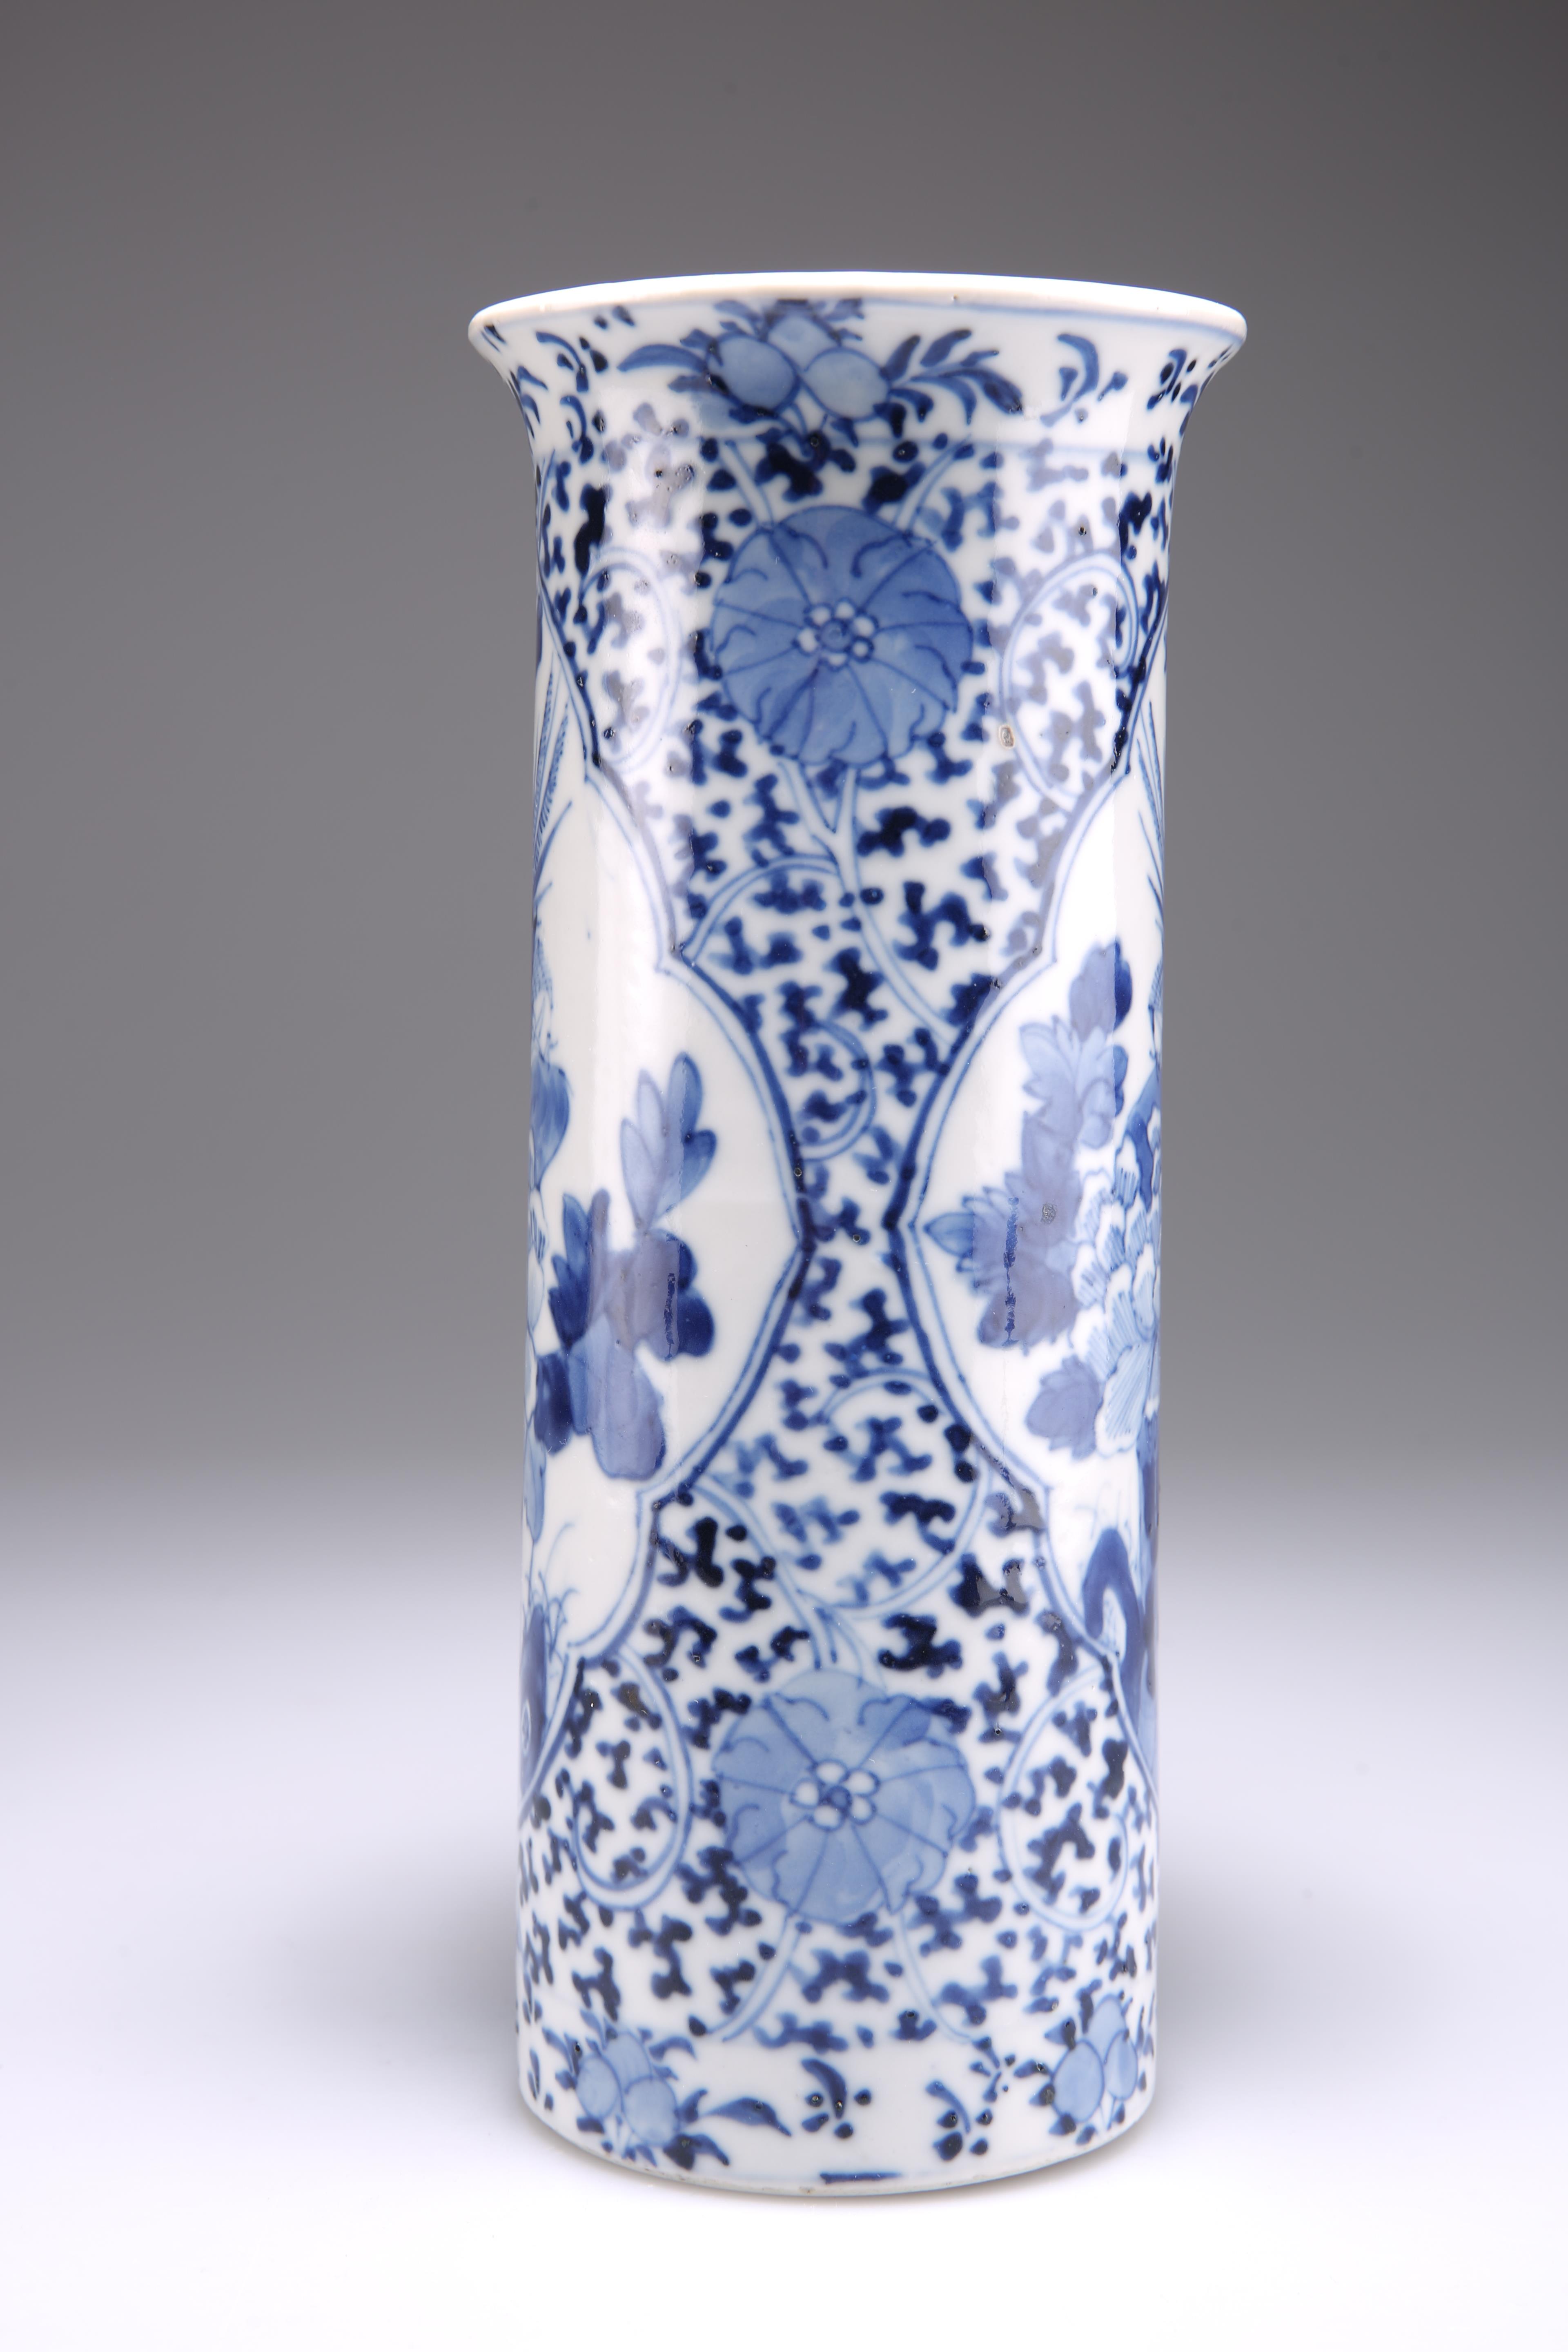 A 19TH CENTURY CHINESE BLUE AND WHITE PORCELAIN SLEEVE VASE - Image 3 of 3